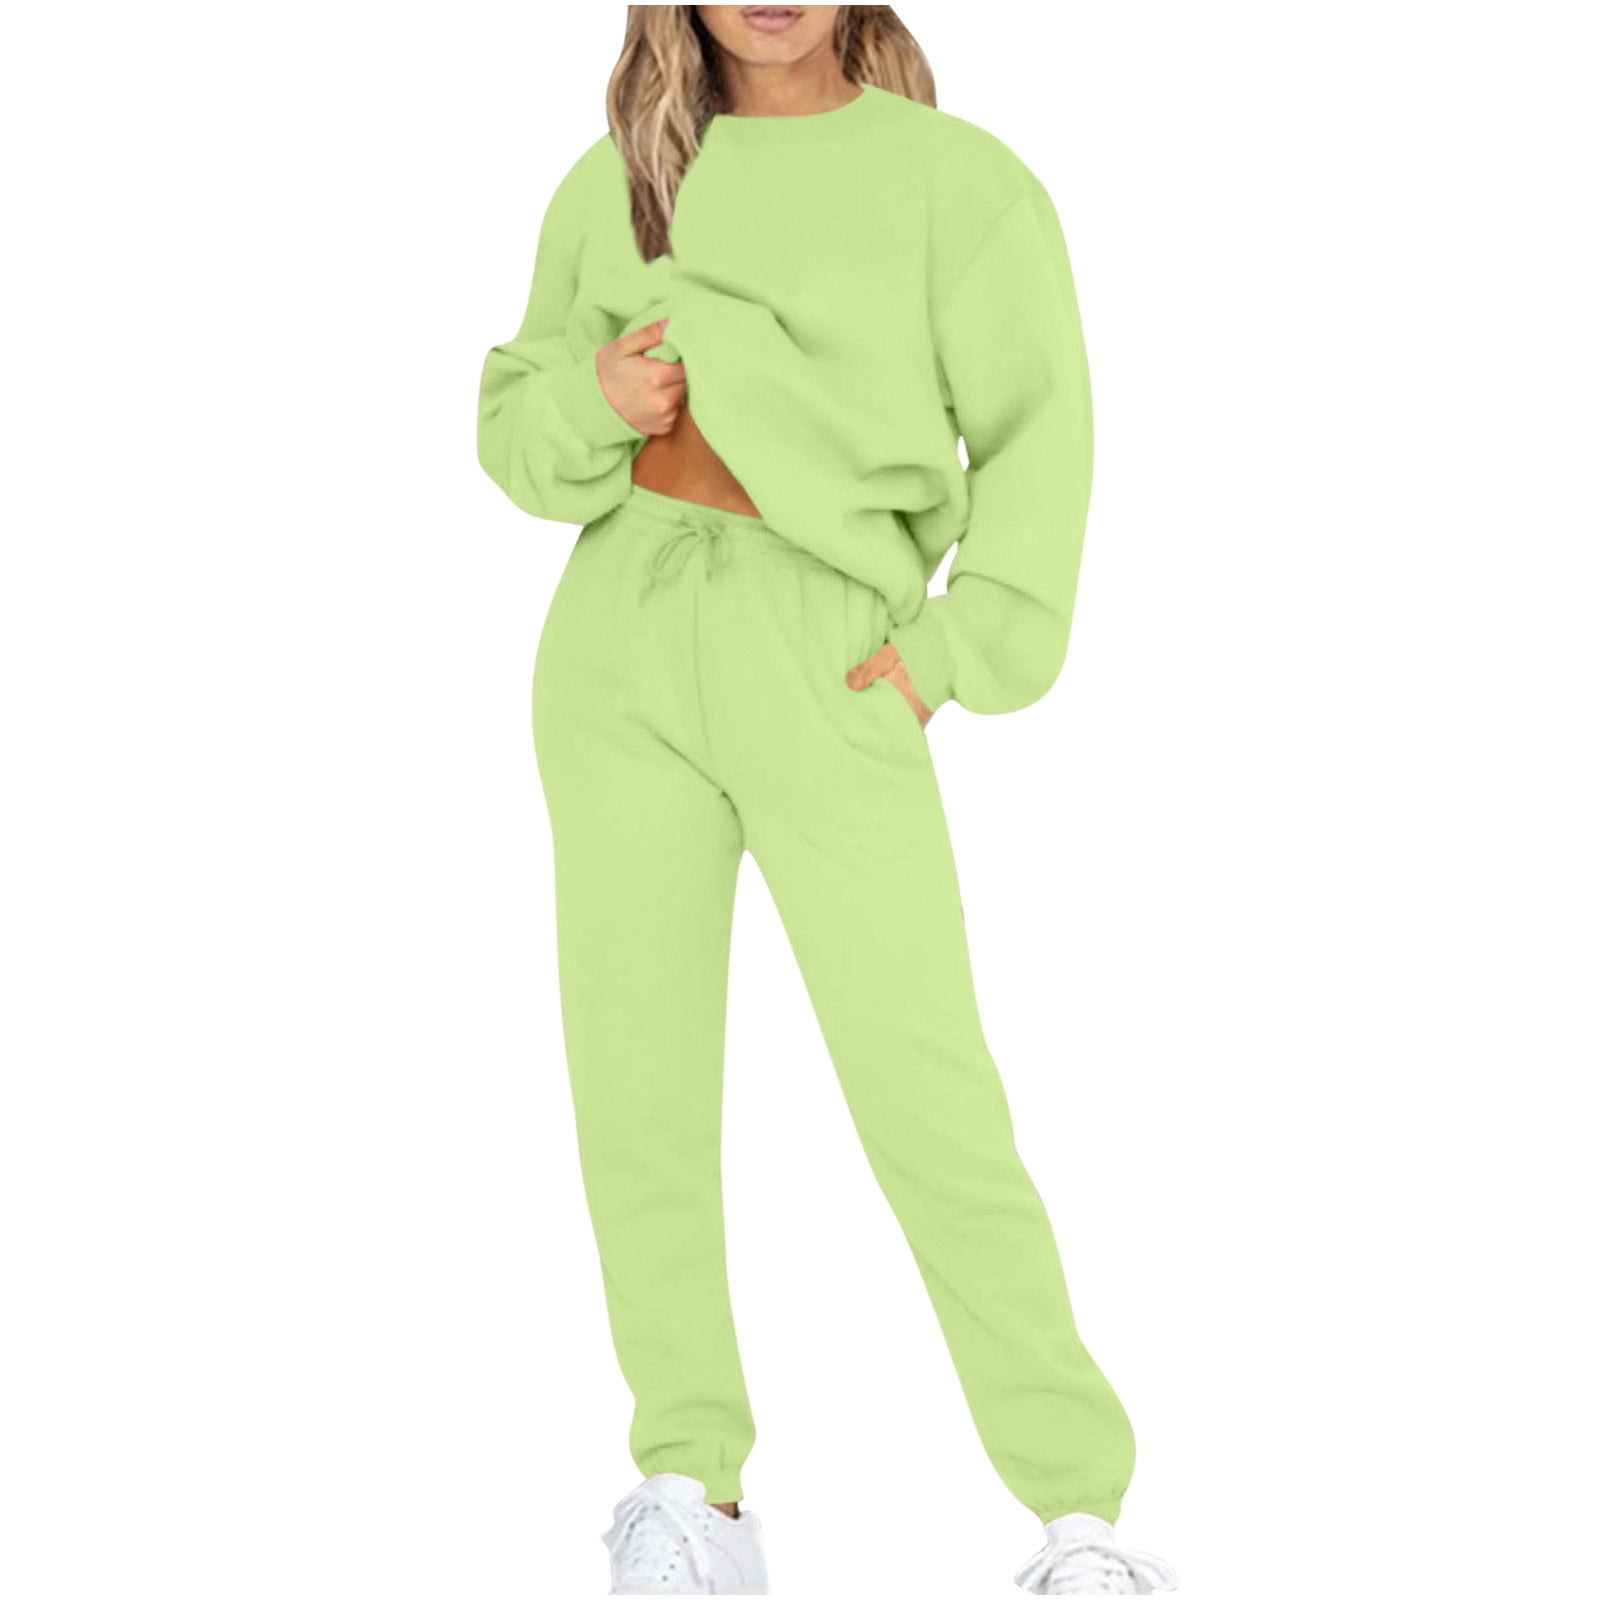 Fengbay Two Piece Outfits for women,Long Sleeve Crewneck Pullover Tops And  Pants Sweatsuits Lounge Set with Pockets